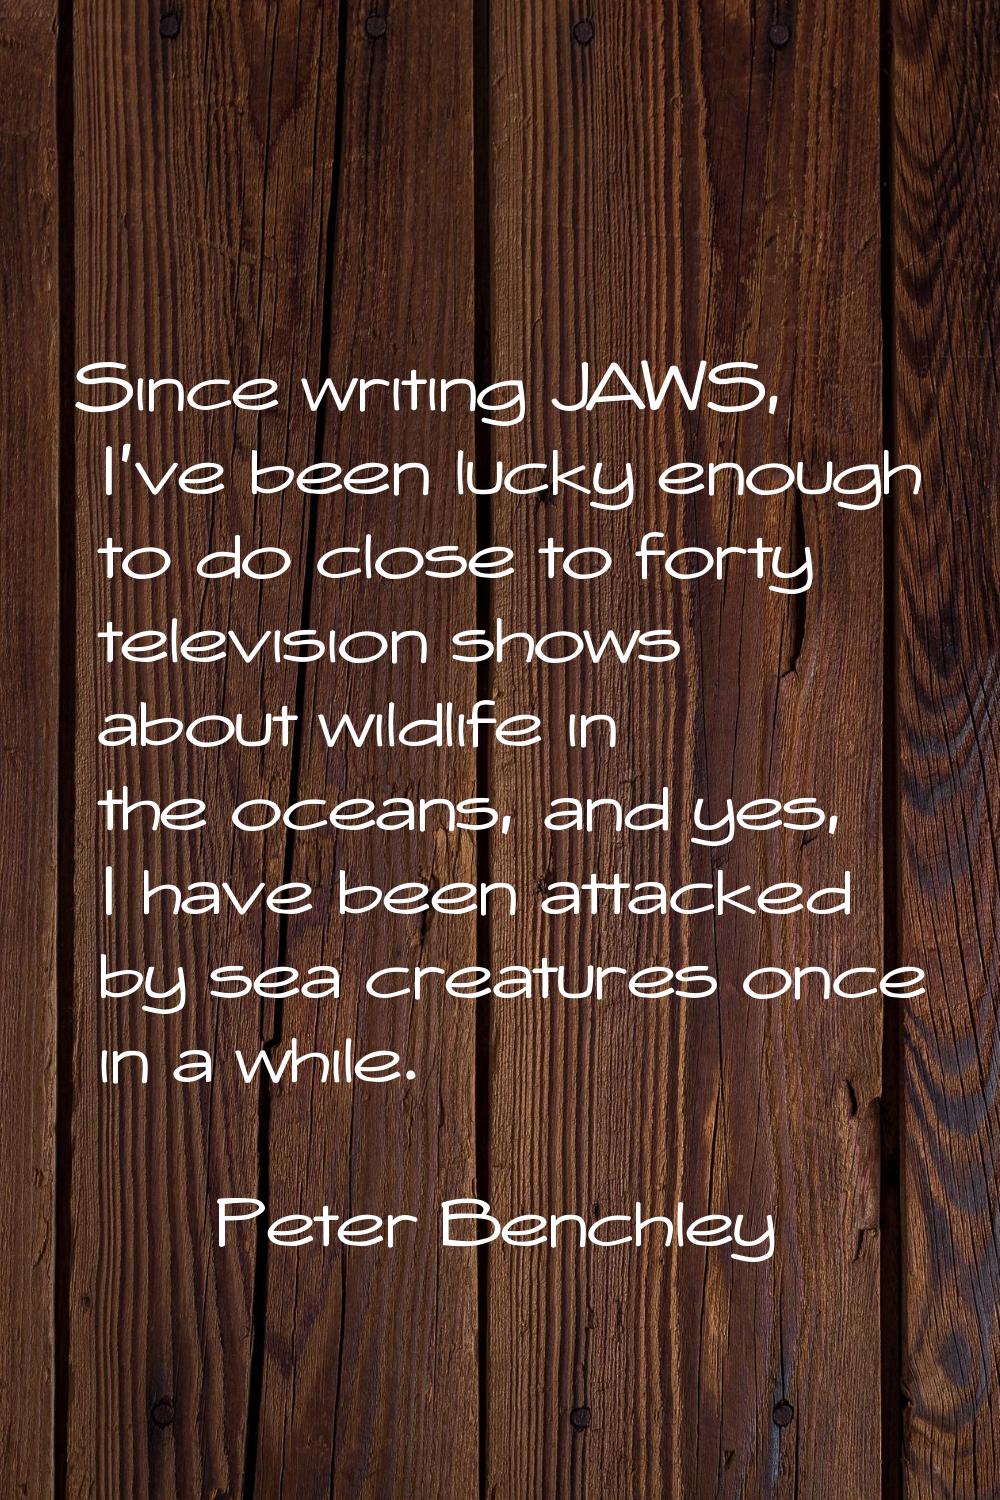 Since writing JAWS, I've been lucky enough to do close to forty television shows about wildlife in 